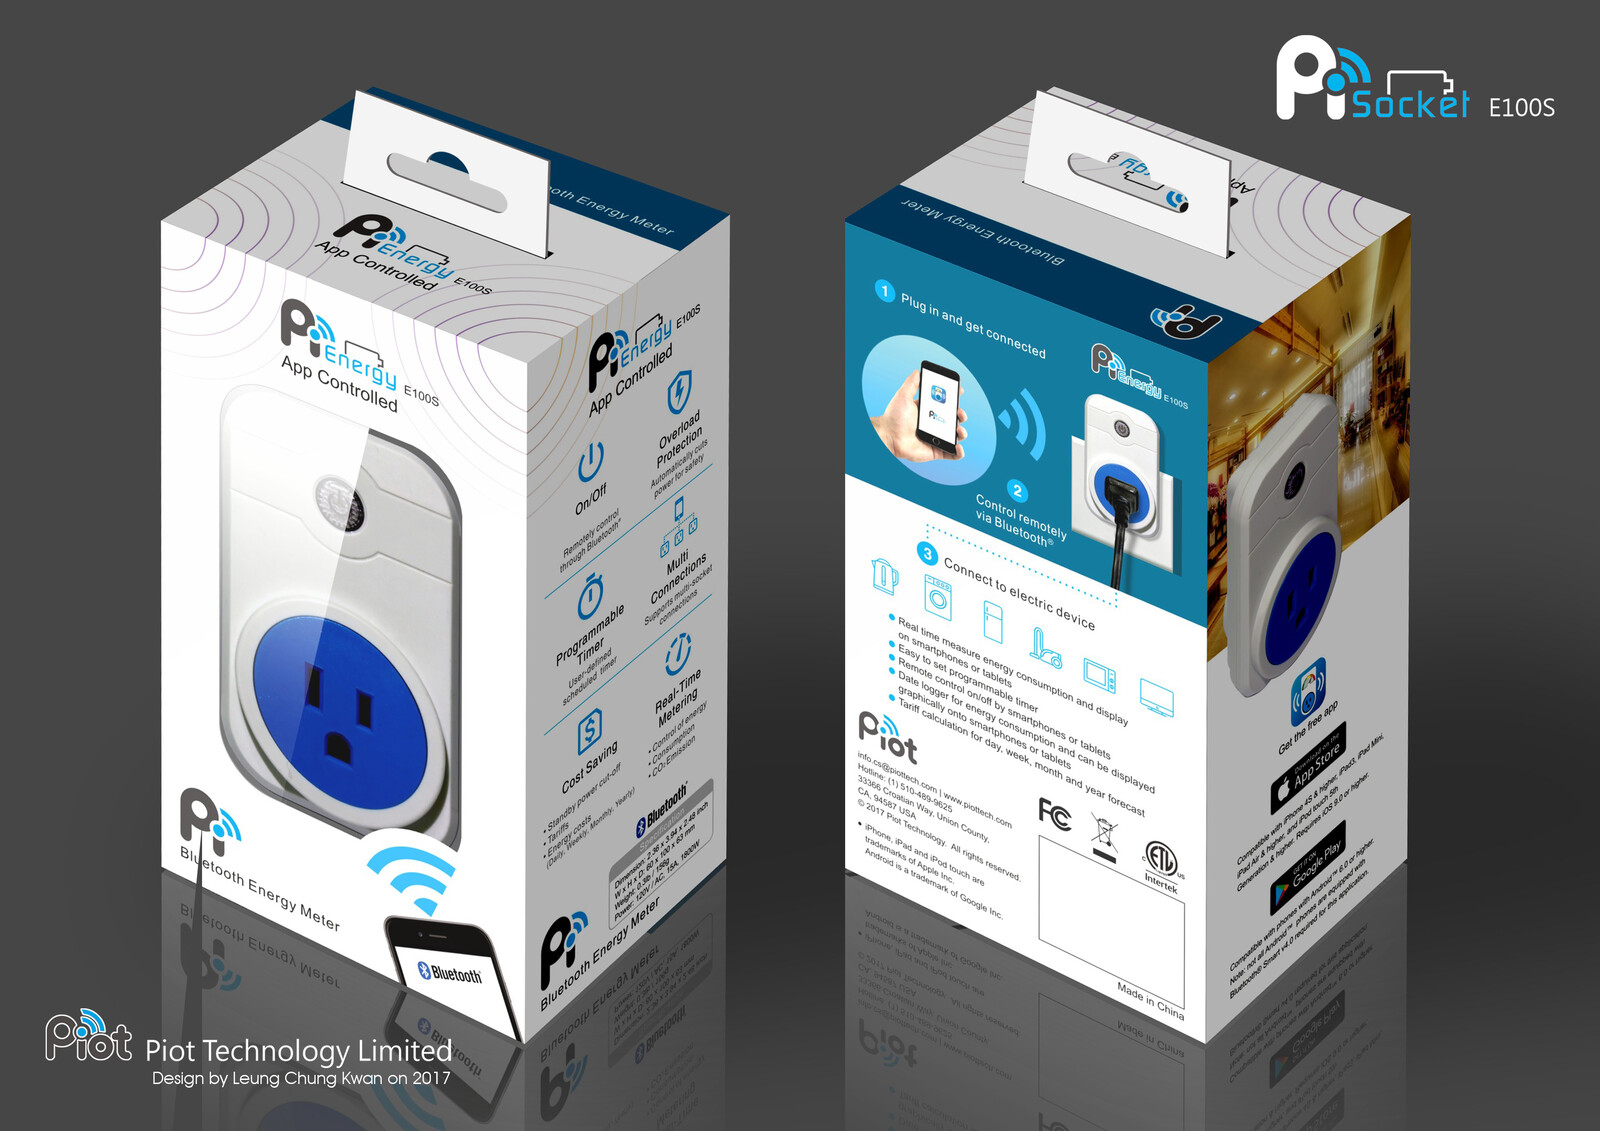 💎 Color Gift Box | Design by Leung Chung Kwan on 2017 💎
Product︰Bluetooth Energy Meter E100s | Product Name︰Pi Energy
Brand Name︰Piot | Client︰Piot Technology Limited
Graphic Design Specification︰http://bit.ly/pi004-d2-v1